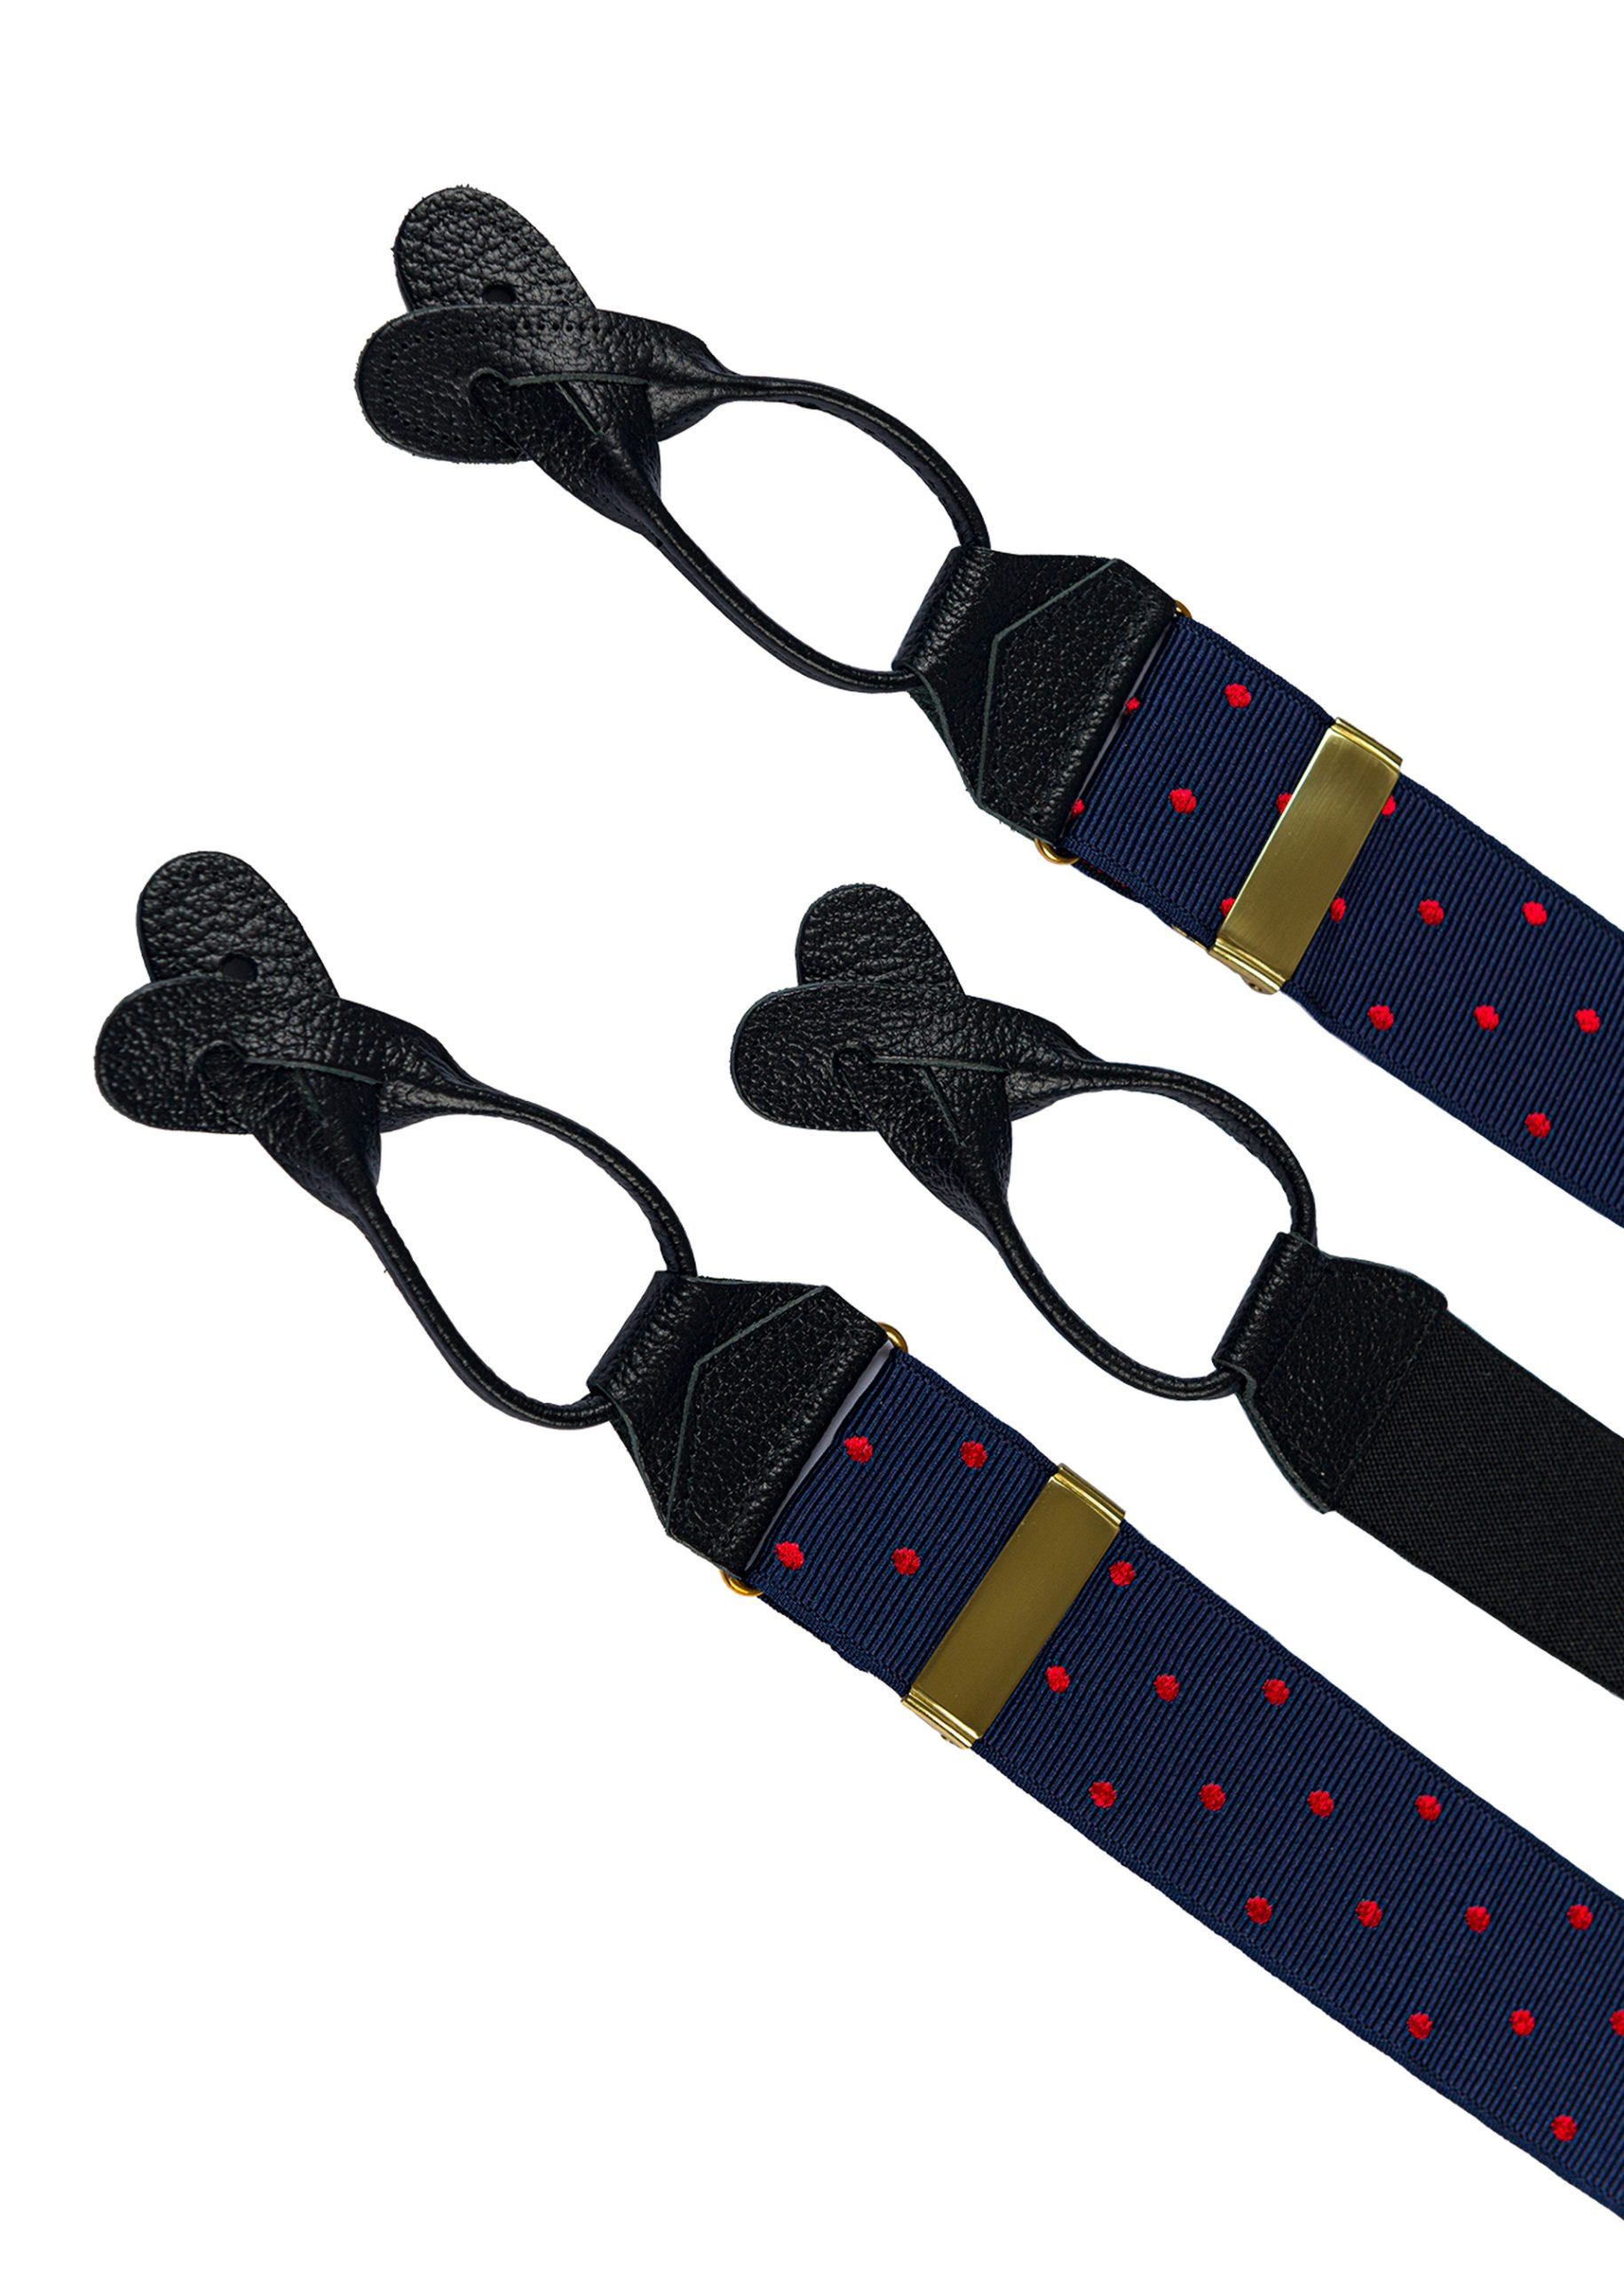 Roderick Charles red polka dot braces in navy and red